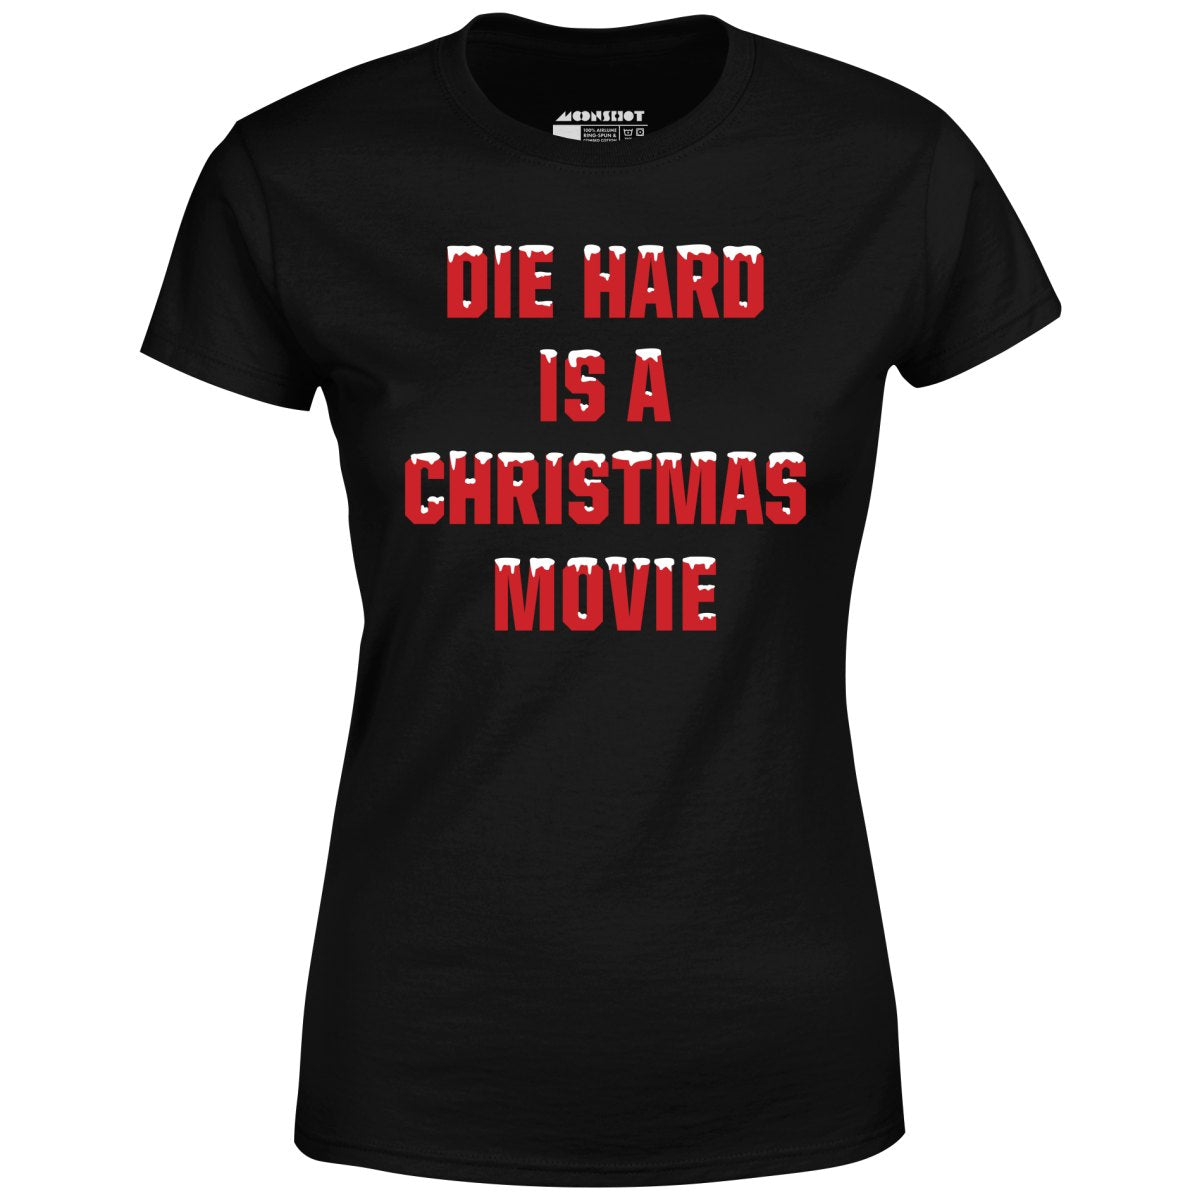 Die Hard is a Christmas Movie - Women's T-Shirt